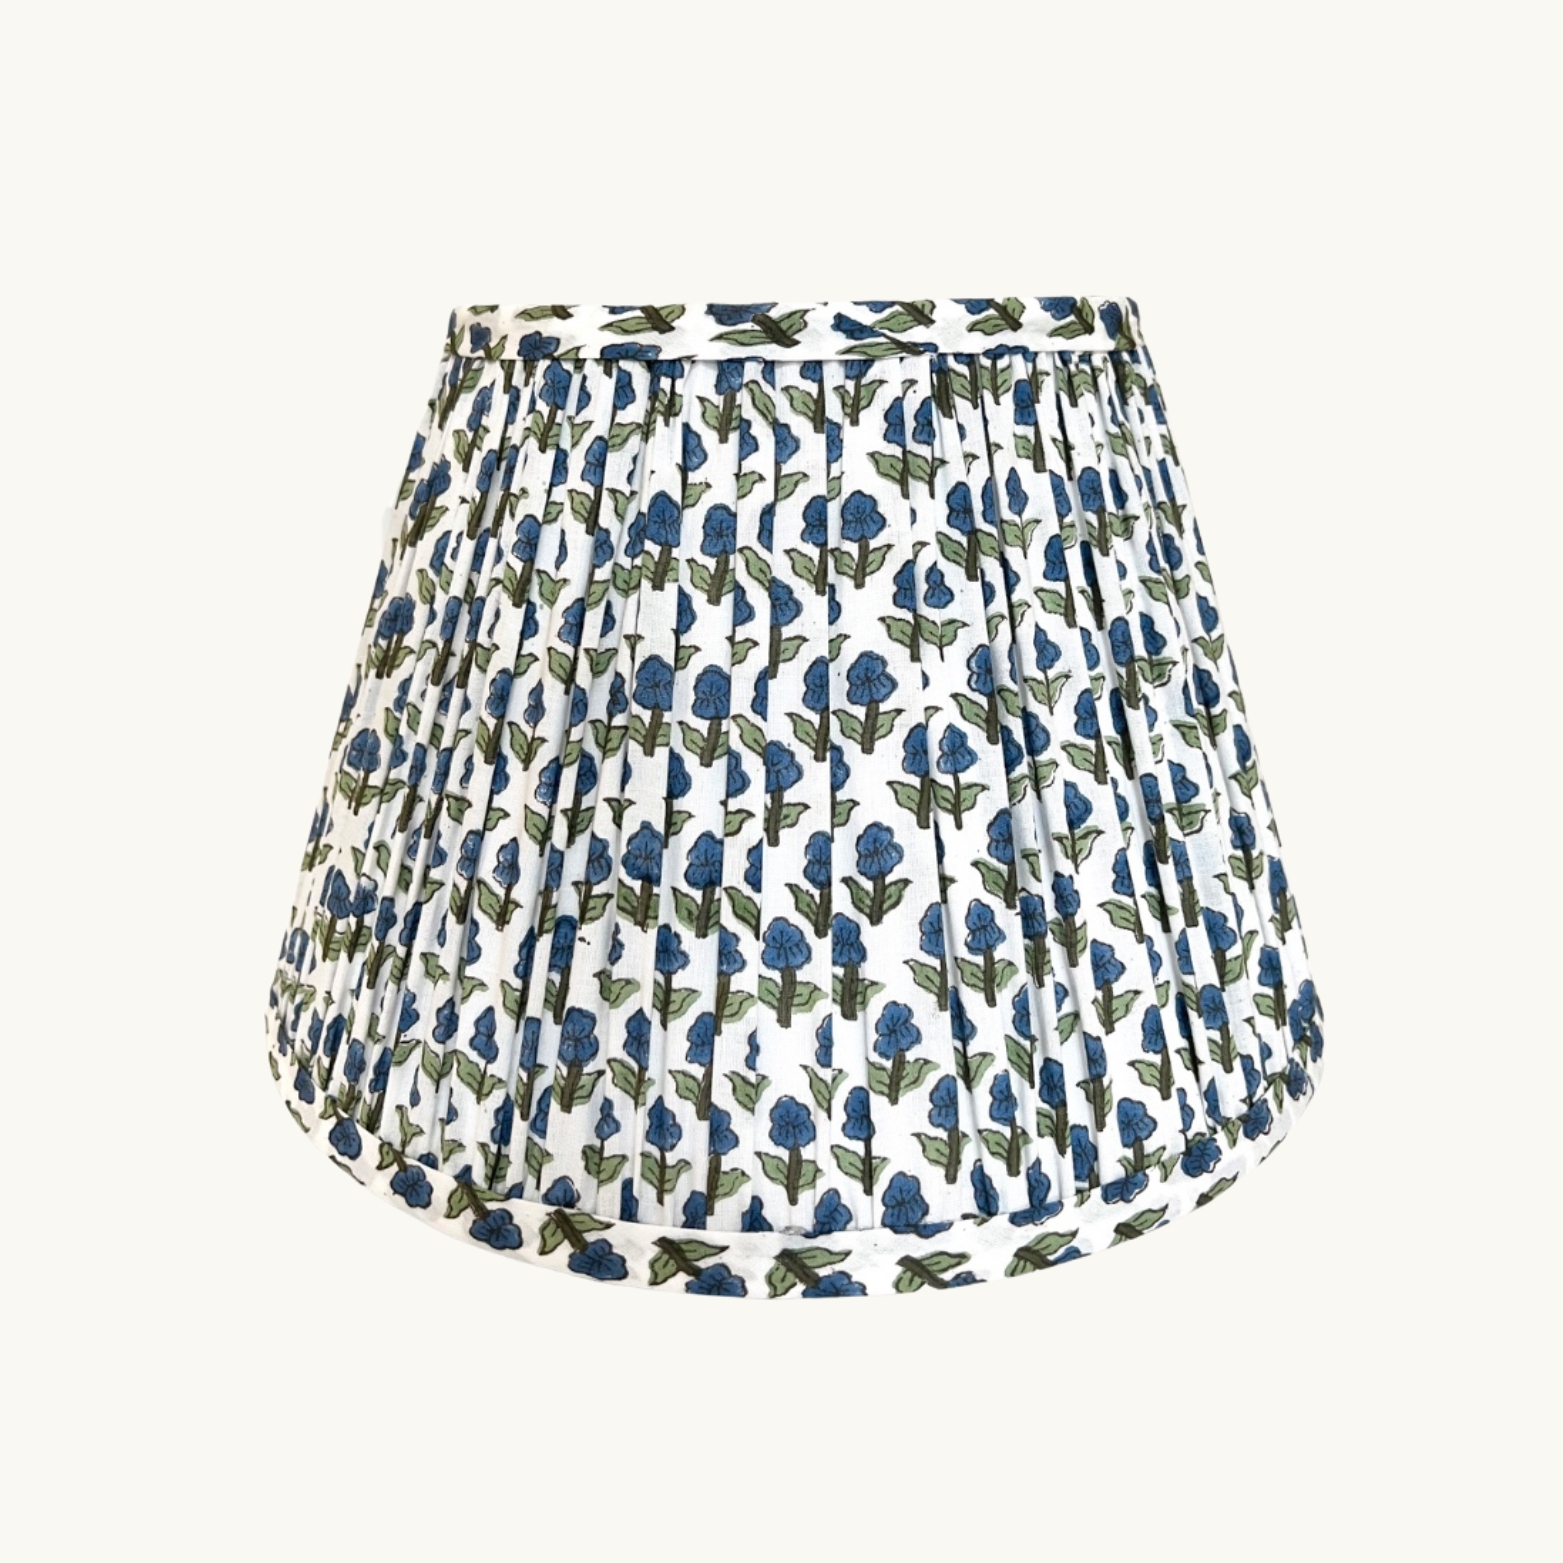 Blue Millie Lampshade